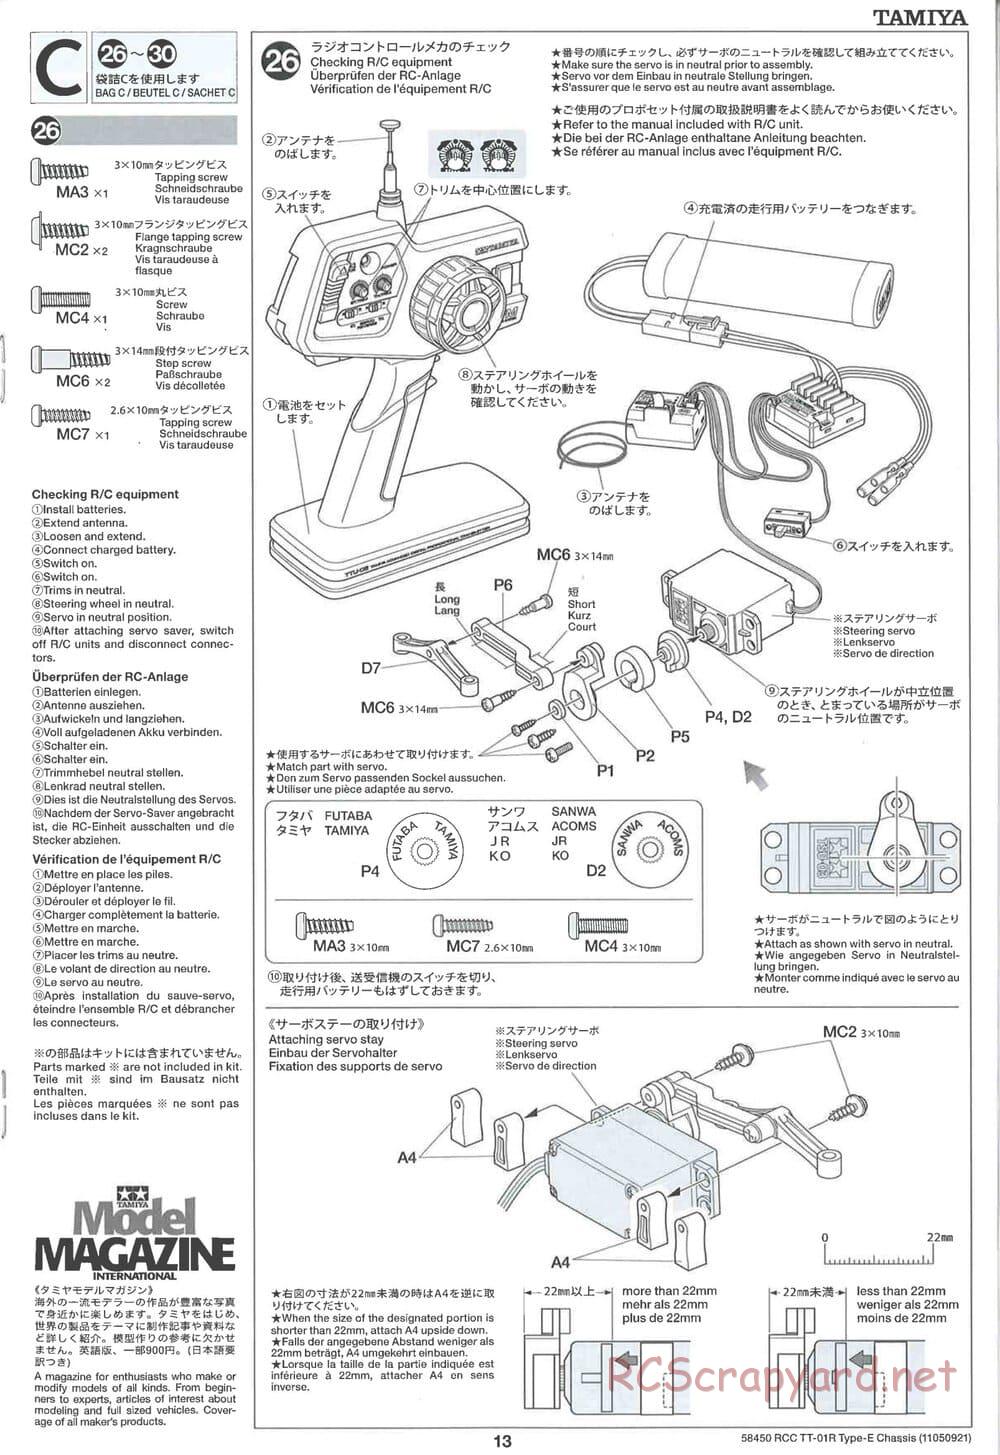 Tamiya - TT-01R Type-E Chassis - Manual - Page 13